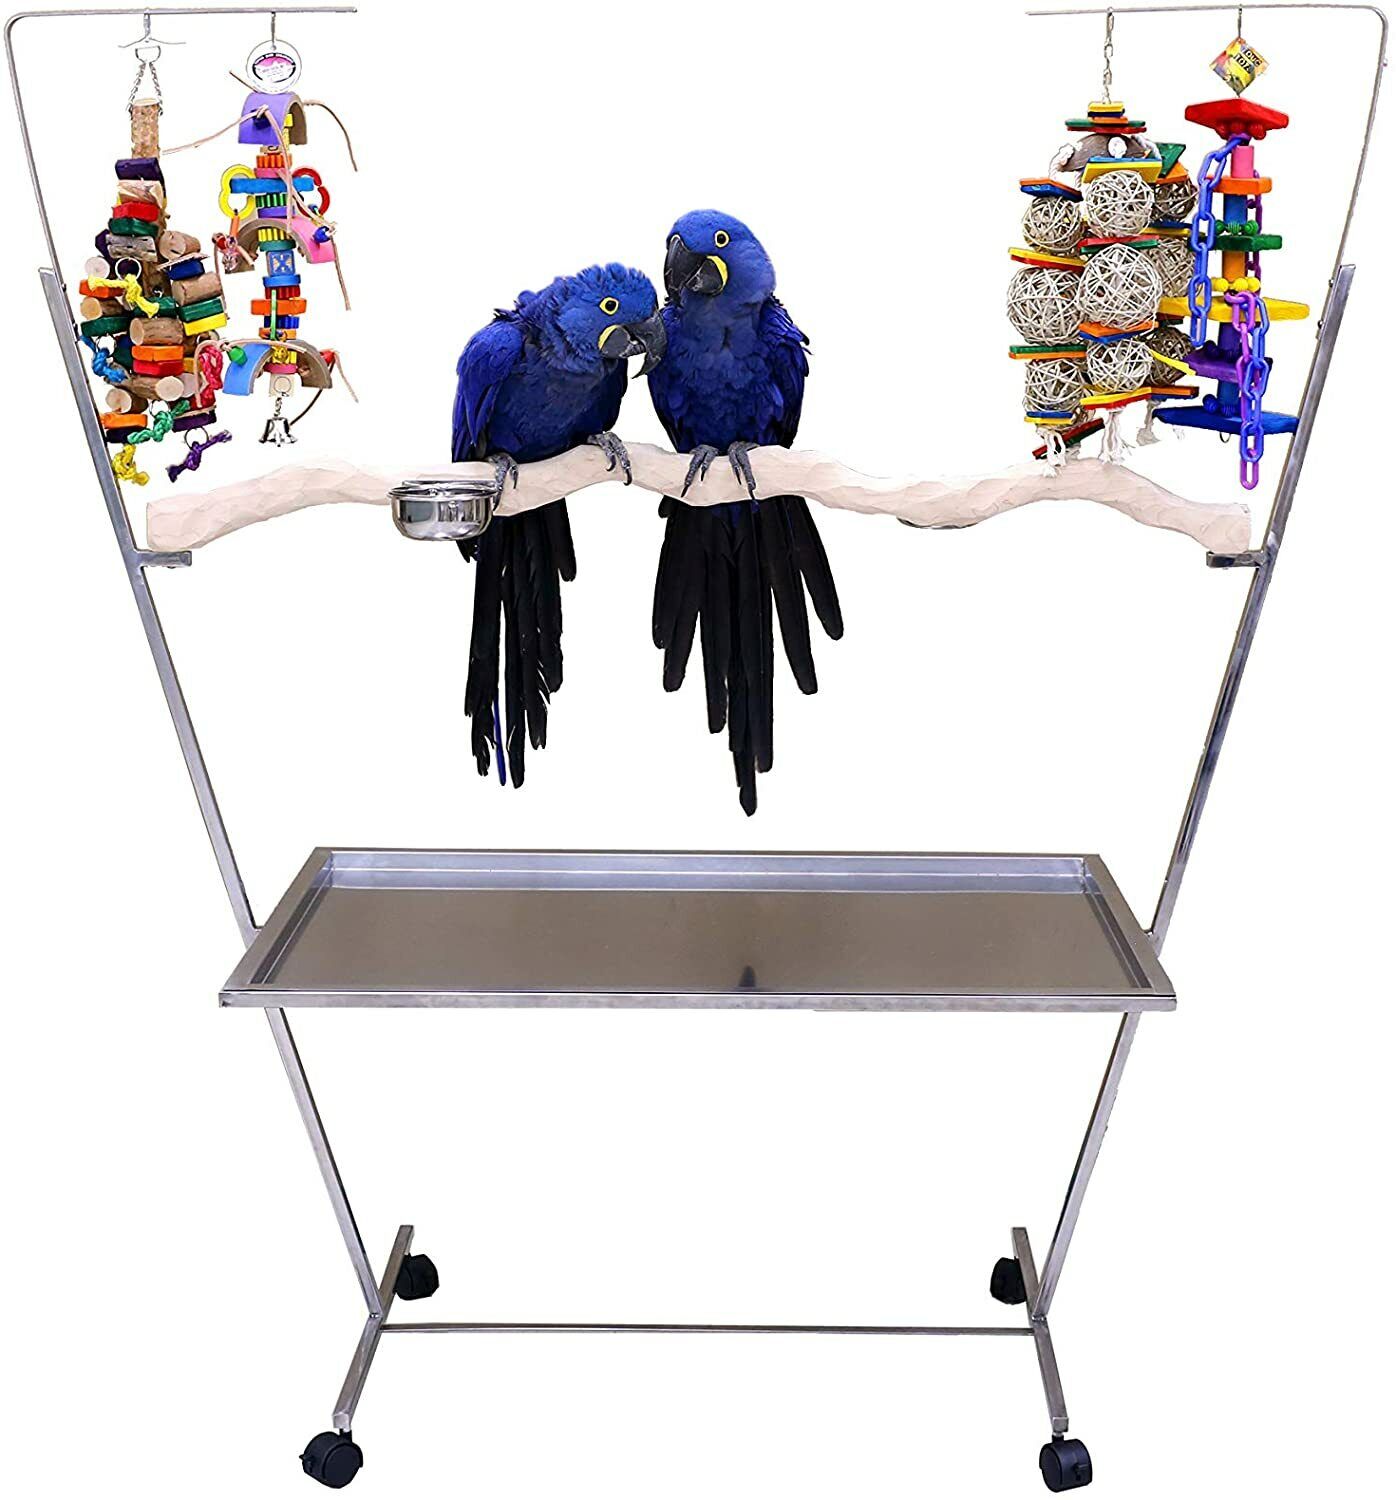 Large Stainless Steel Parrot Play Stand